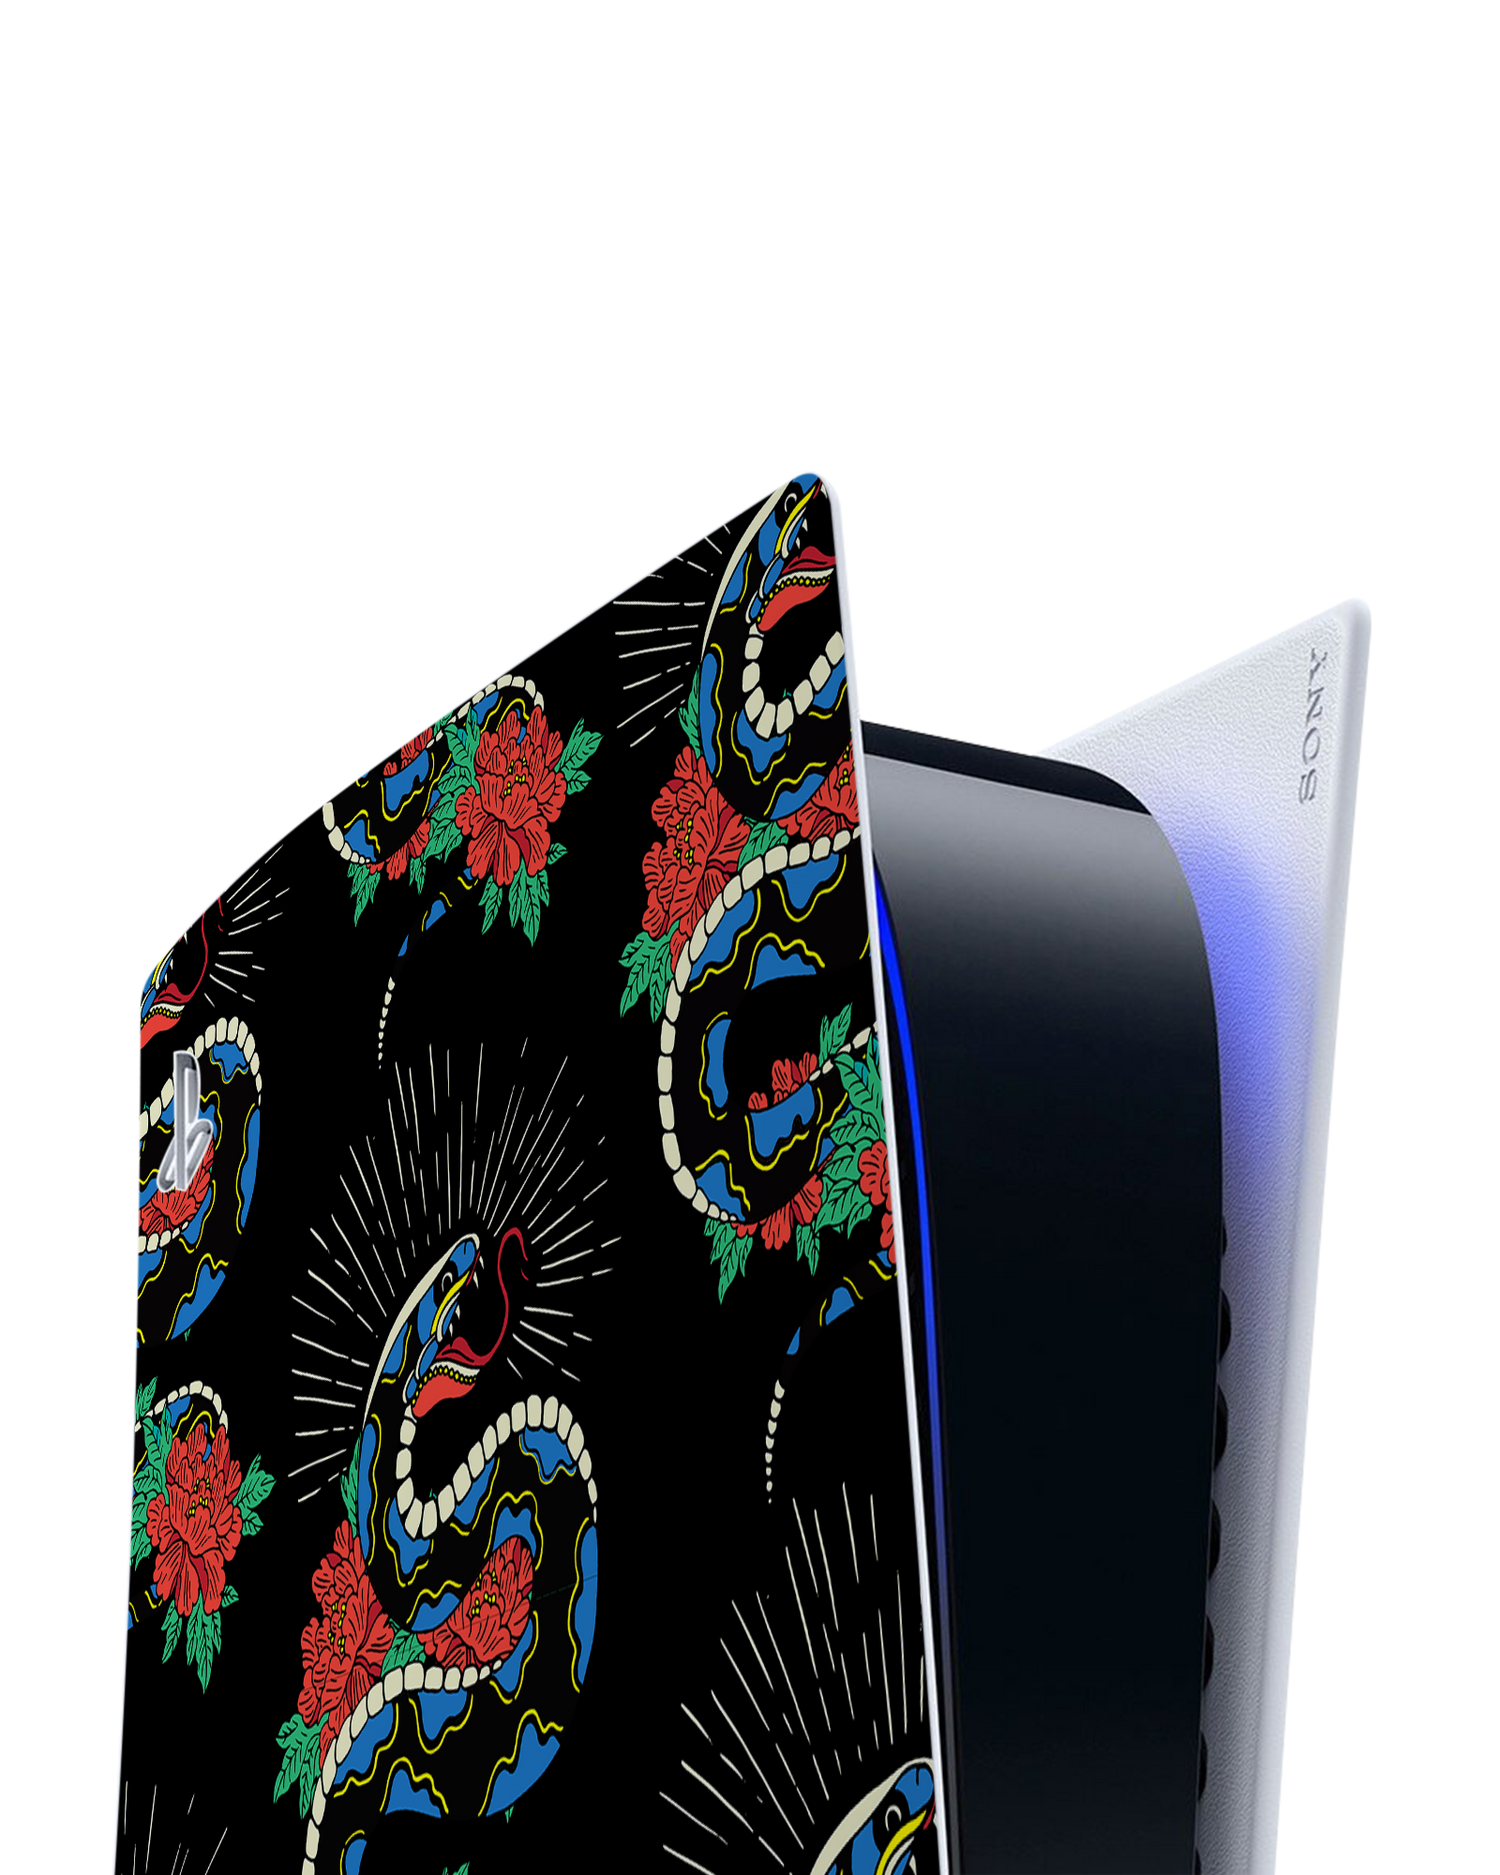 Repeating Snakes 2 Console Skin for Sony PlayStation 5 Digital Edition: Detail shot